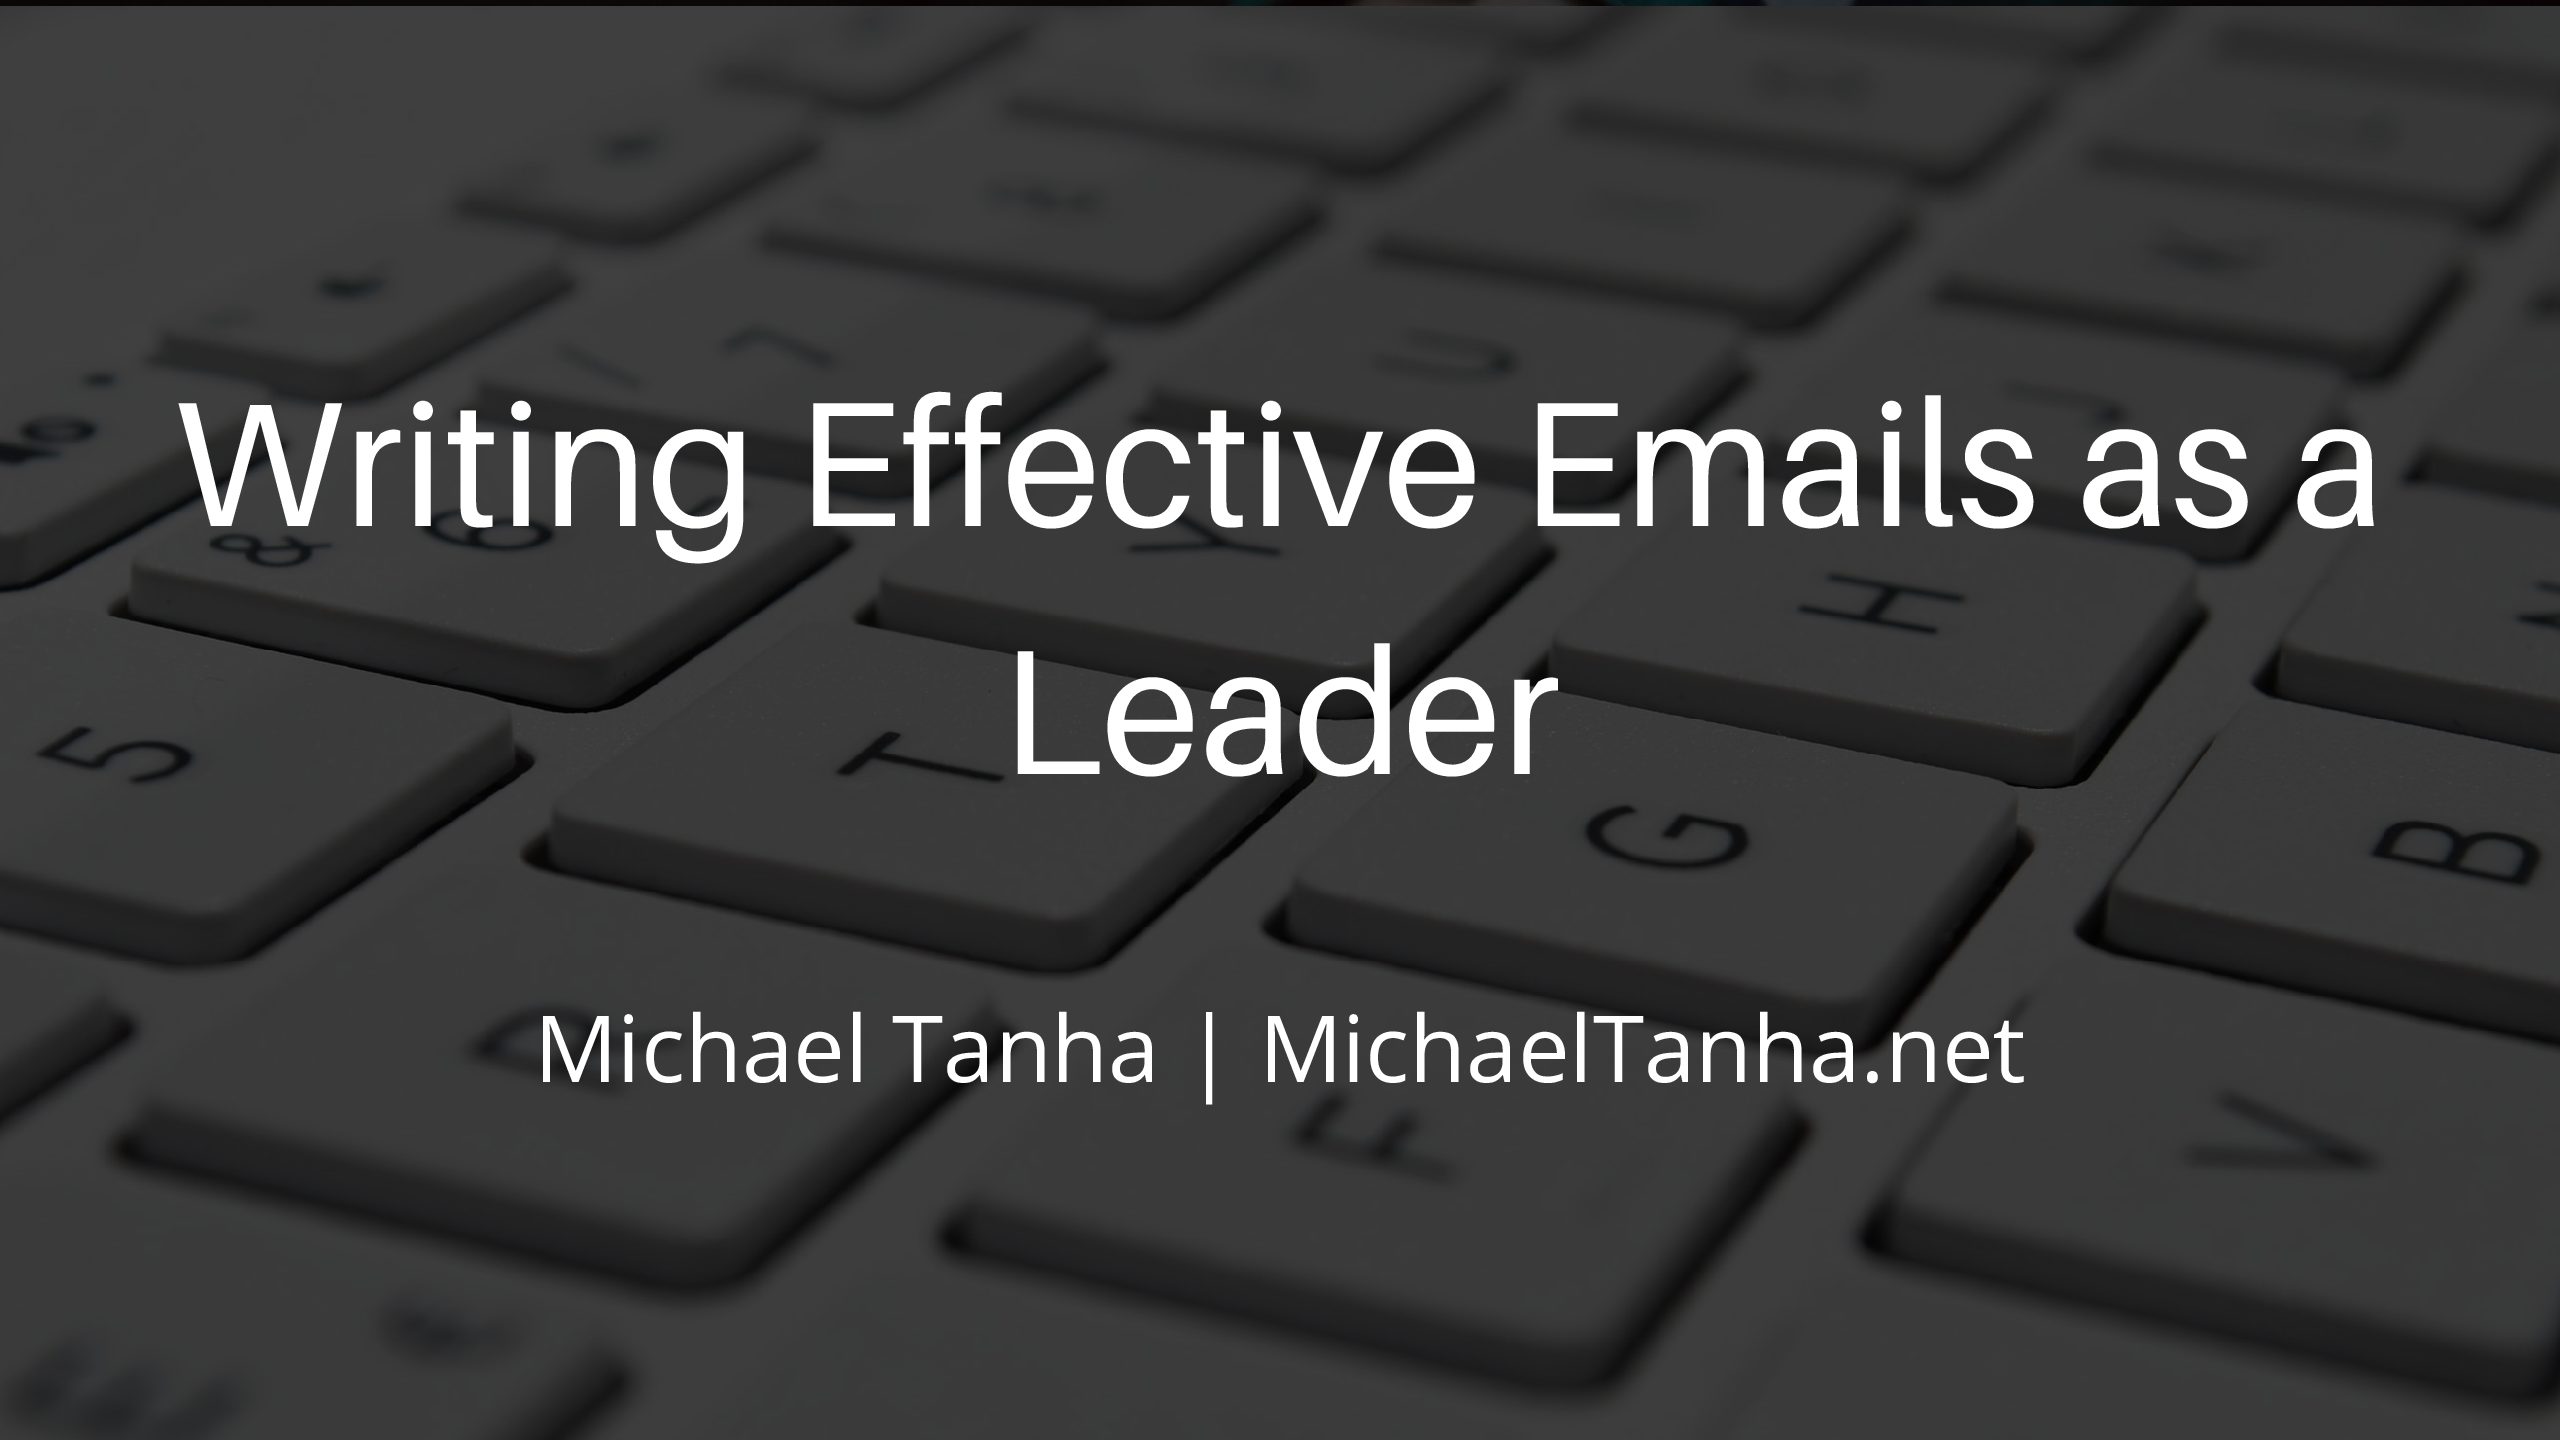 Writing Effective Emails as a Leader